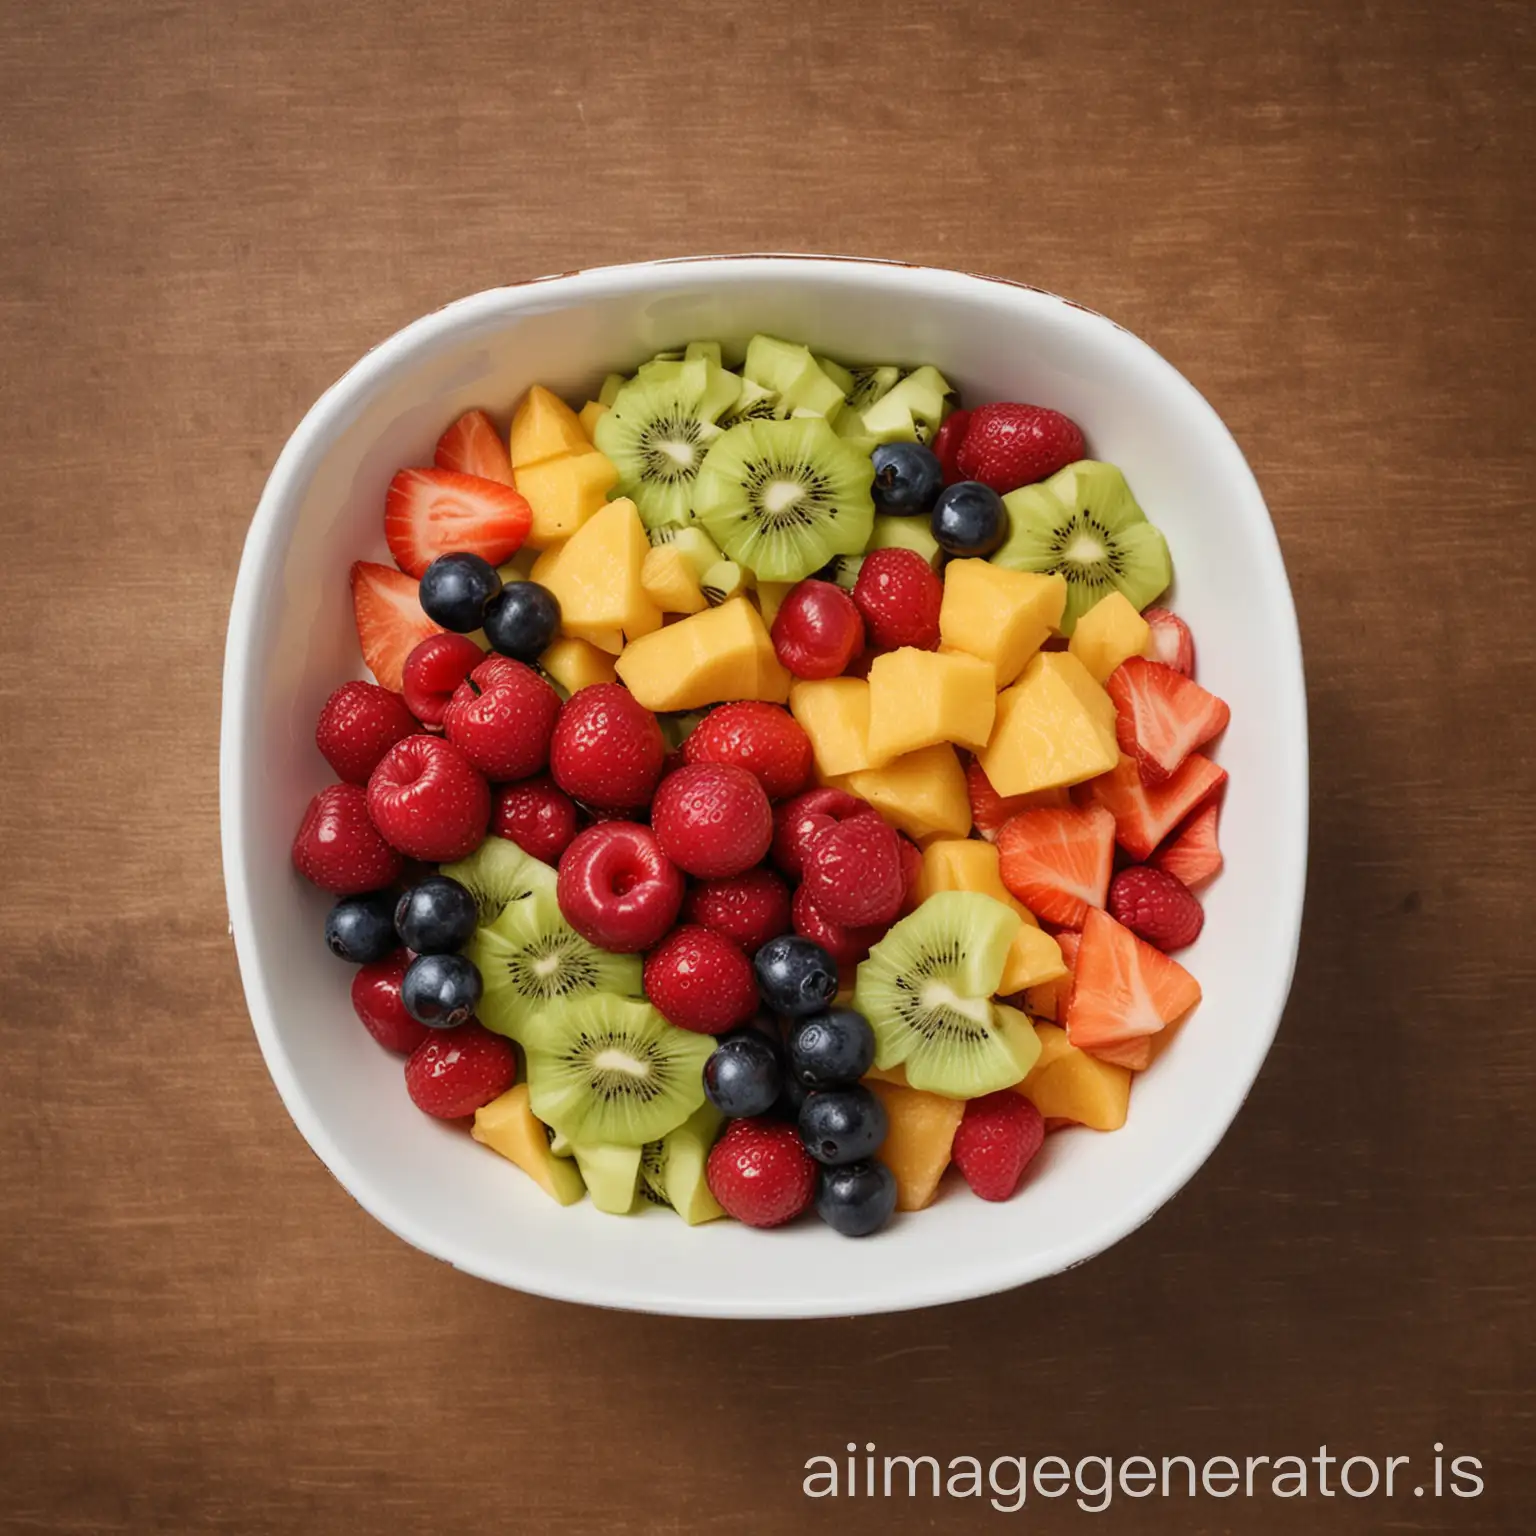 Colorful-Bowl-of-Fresh-Fruits-Healthy-Snack-for-NutrientRich-Refreshment